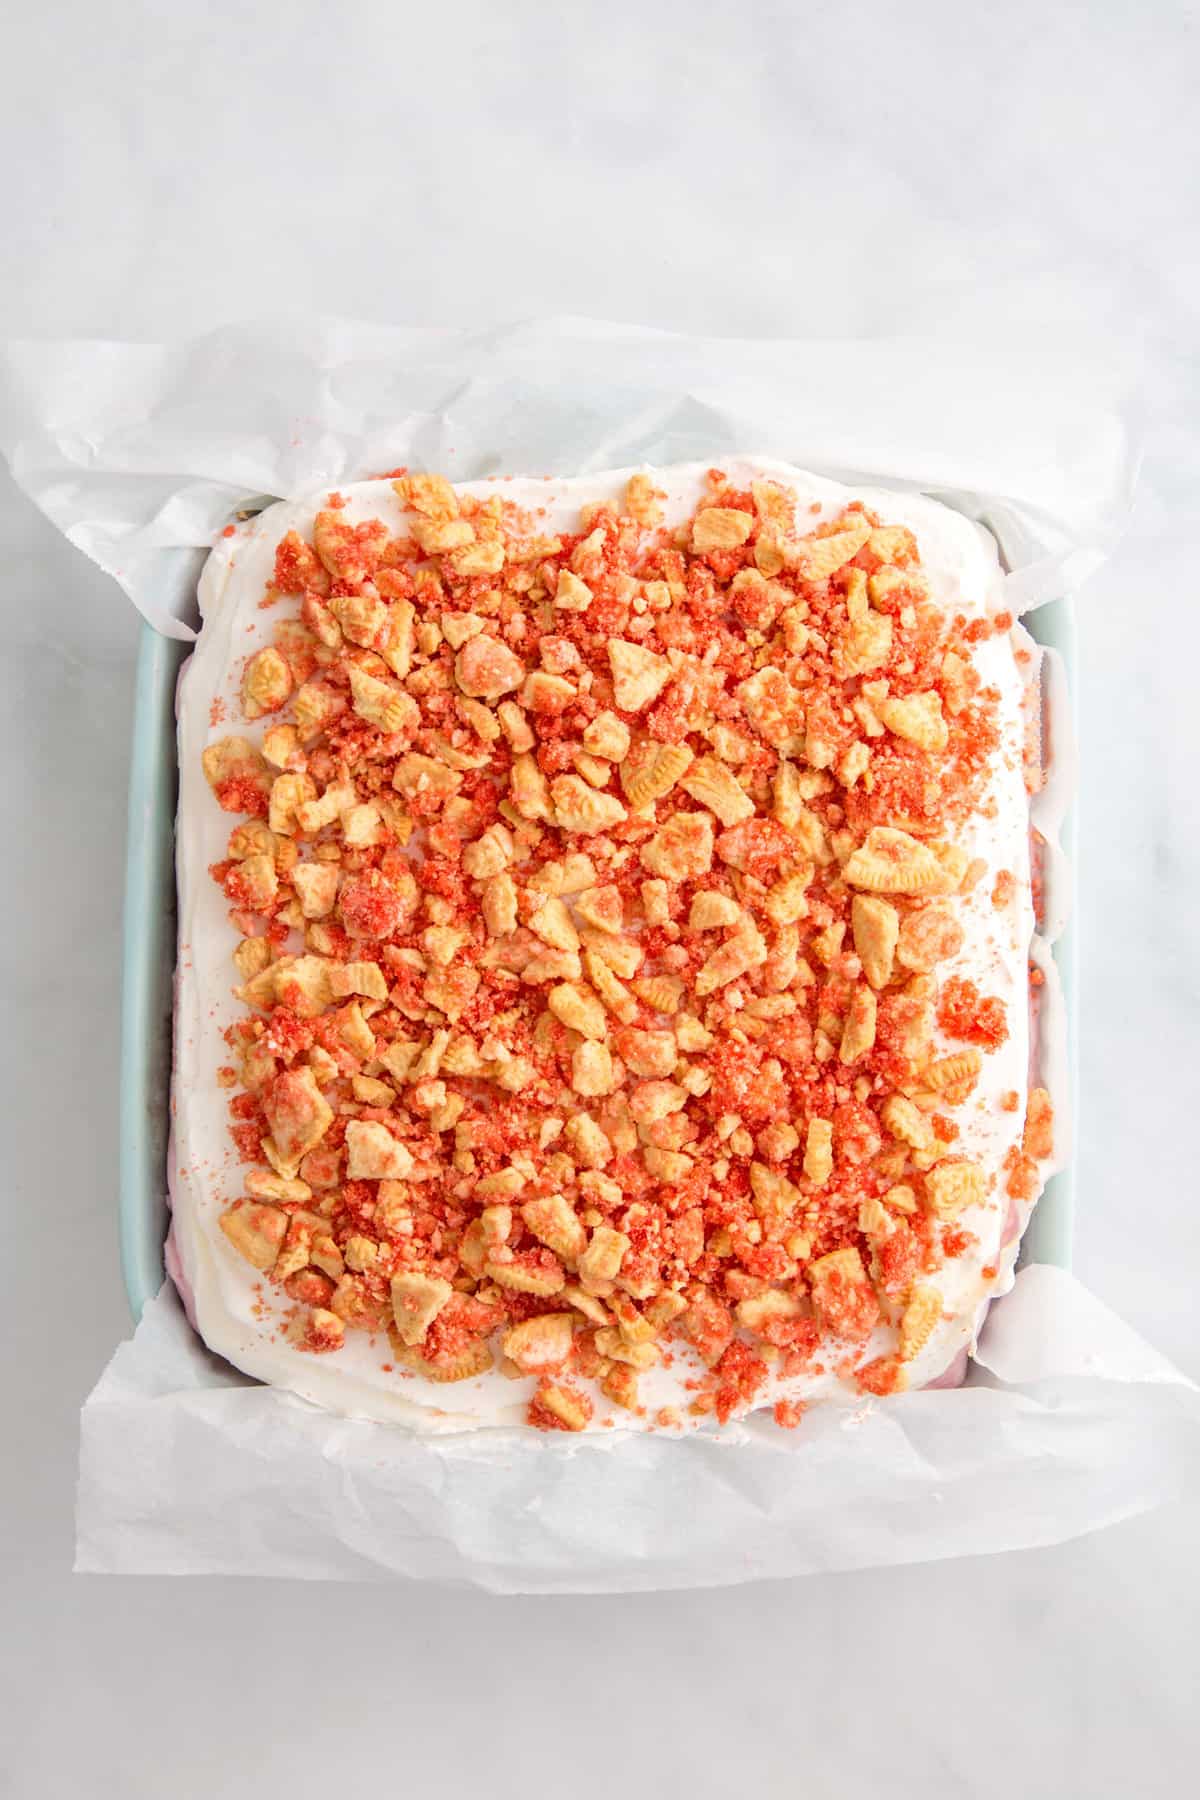 all the layers of strawberry crunch ice cream cake assembled in an 8x8 dish